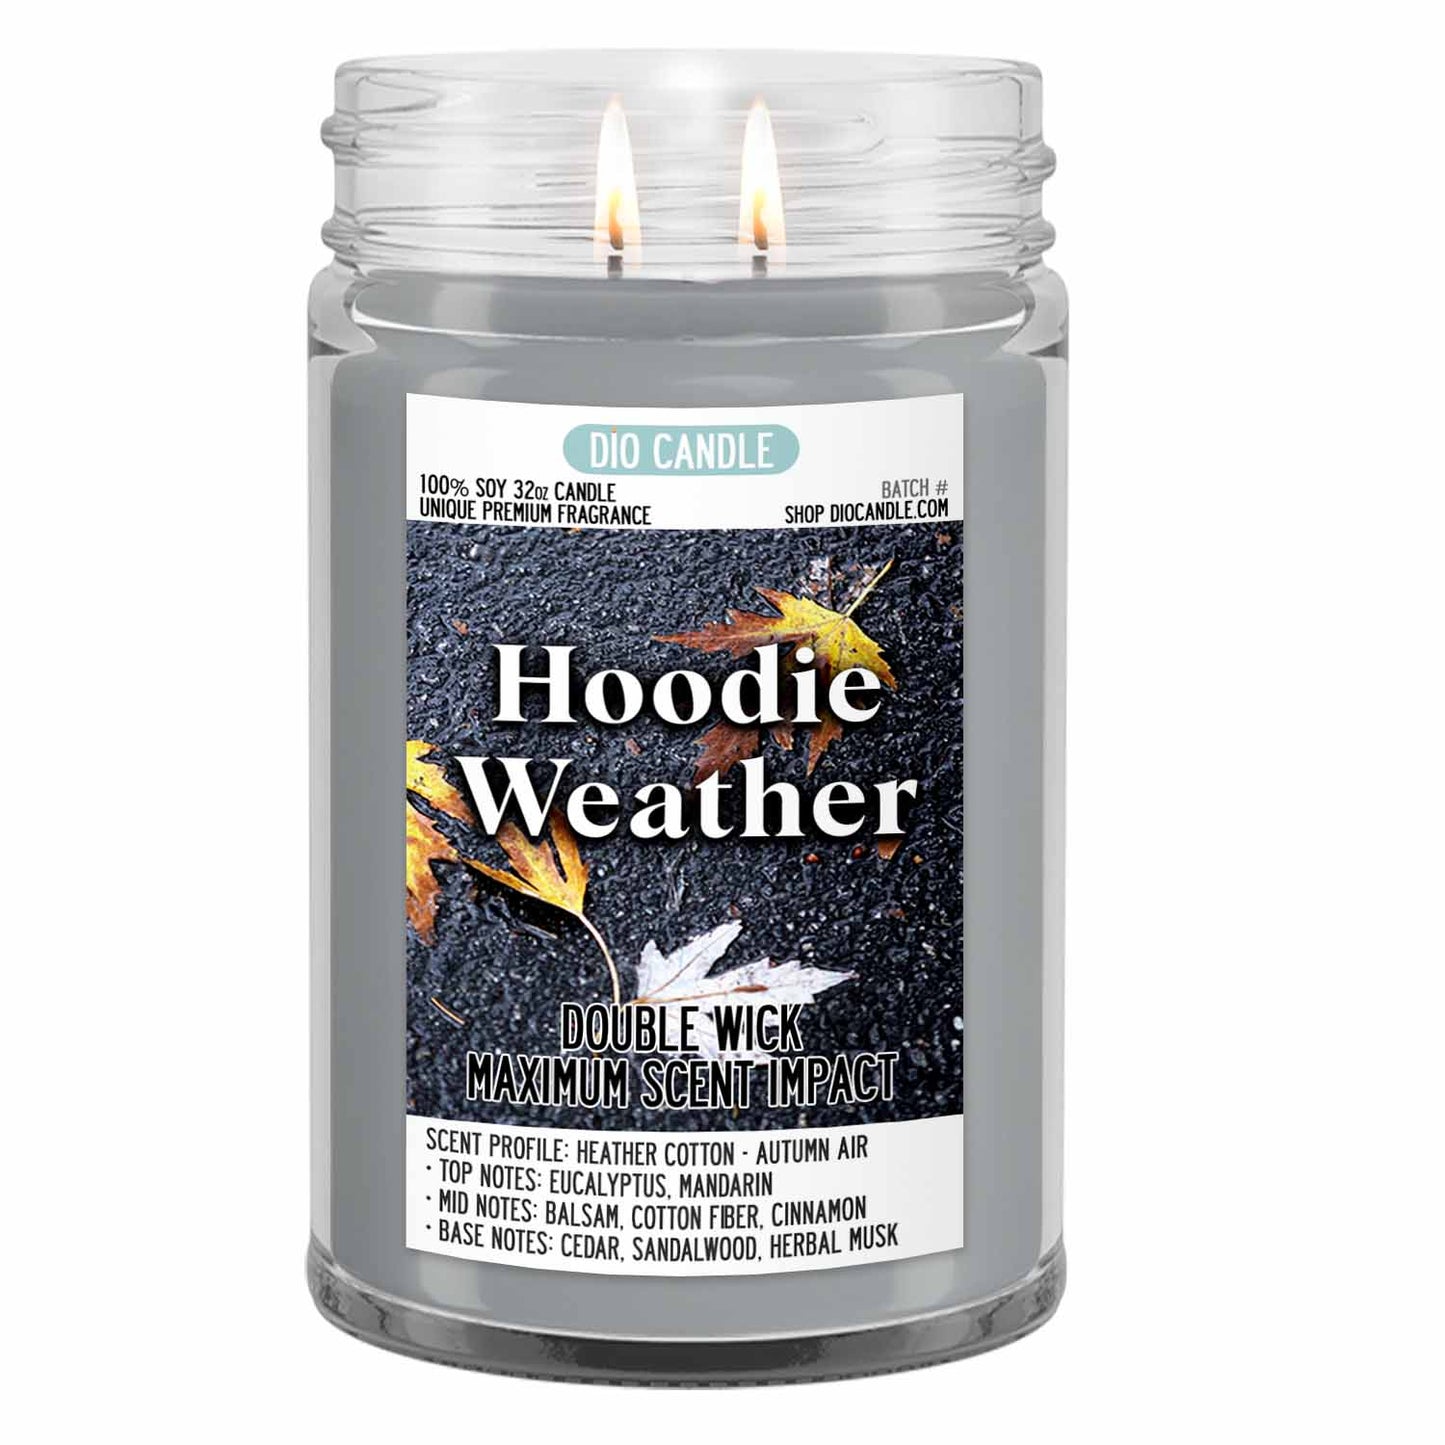 Hoodie Weather Candle